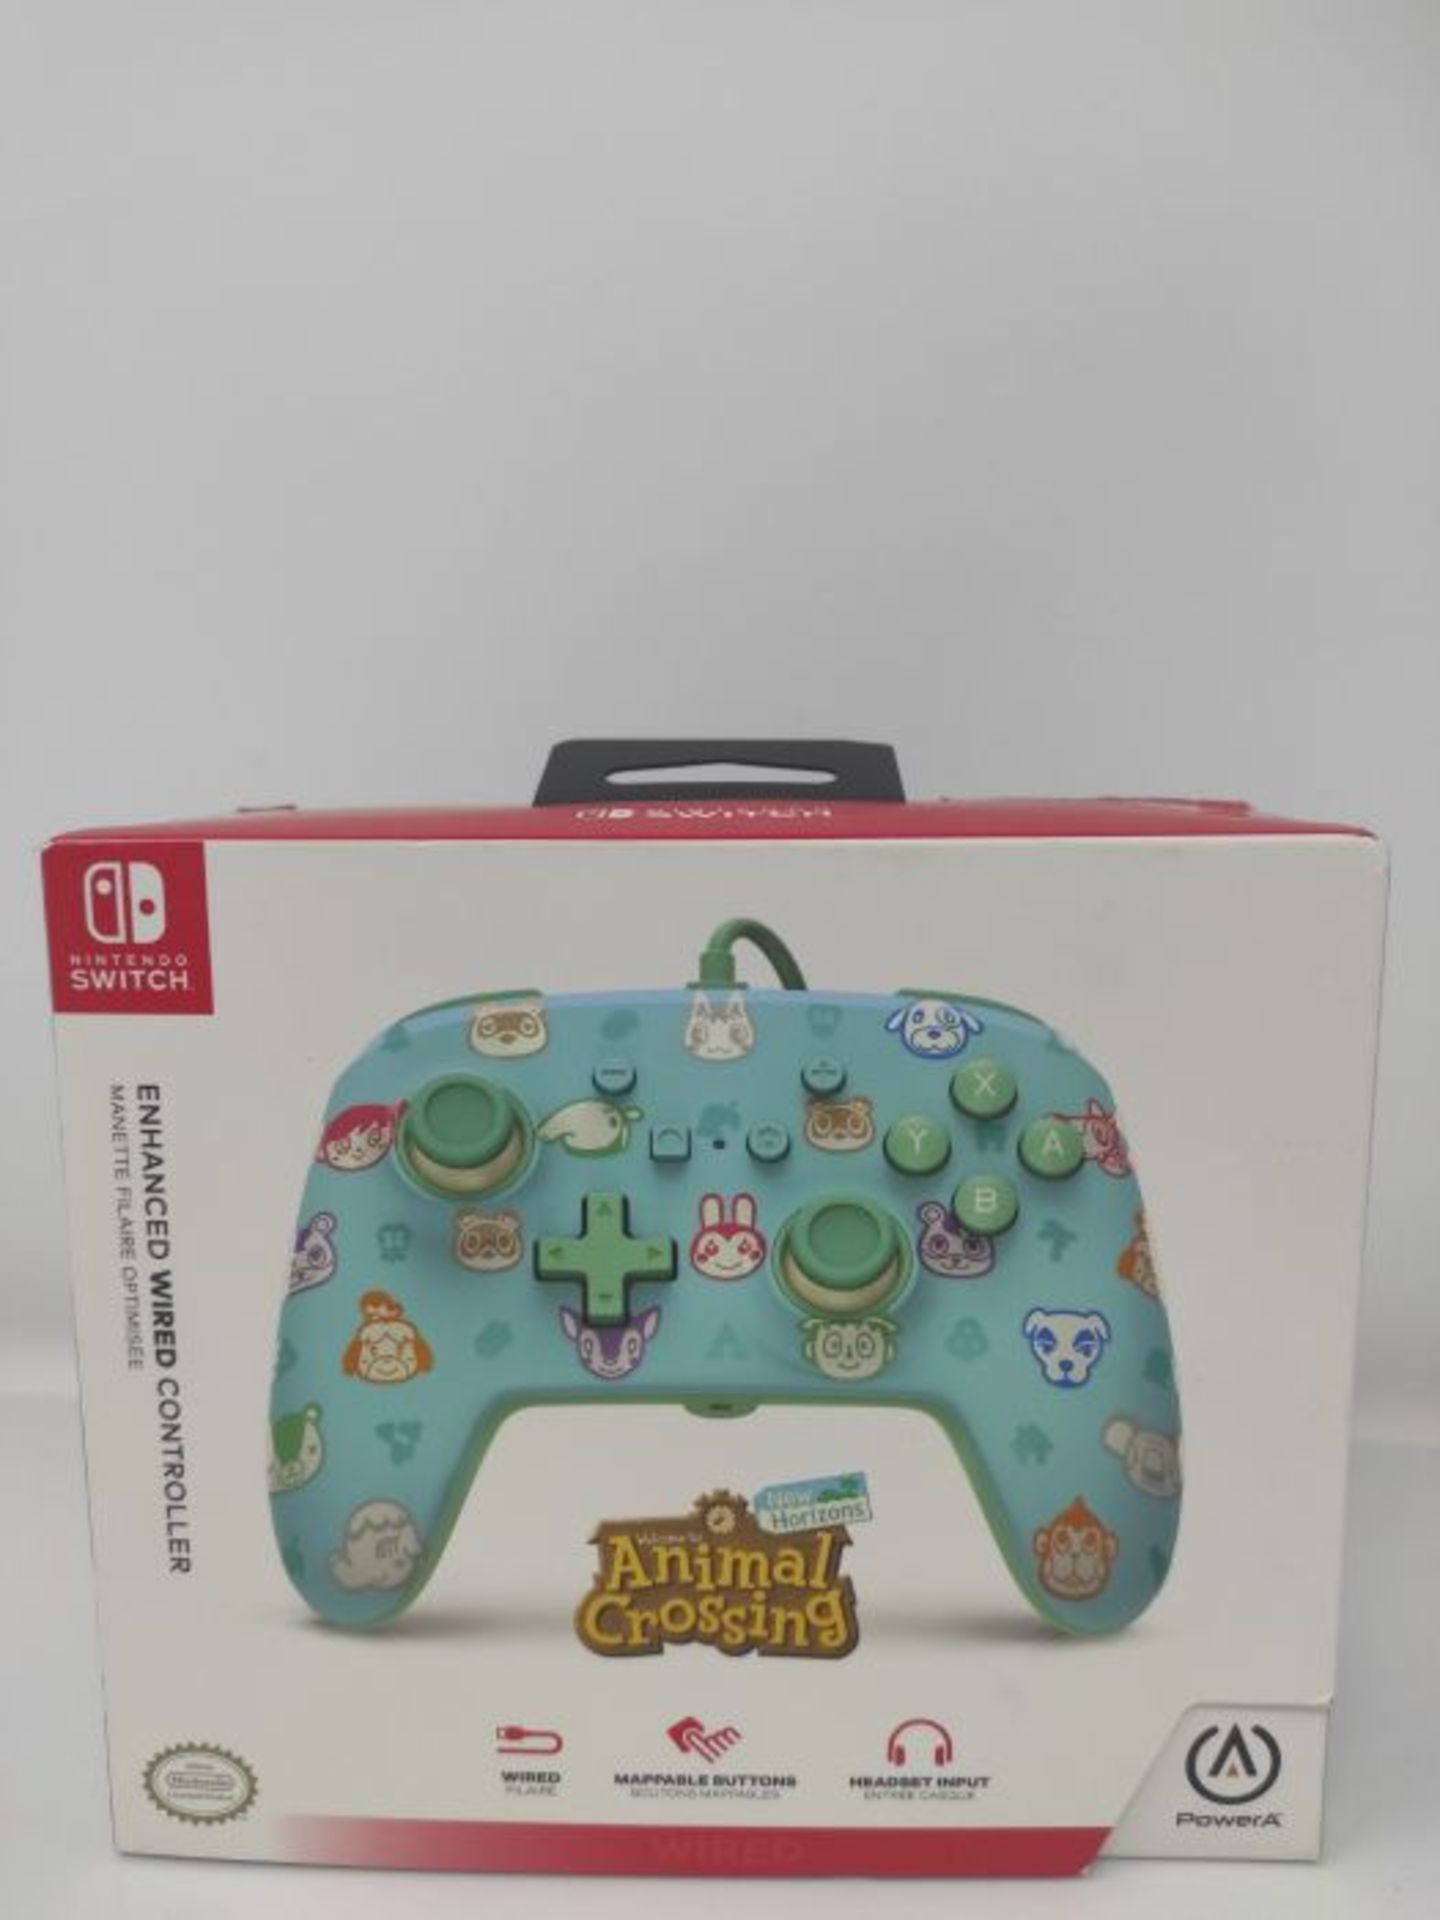 NSW EnWired Controller Animal Crossing New Horizons - Image 2 of 3